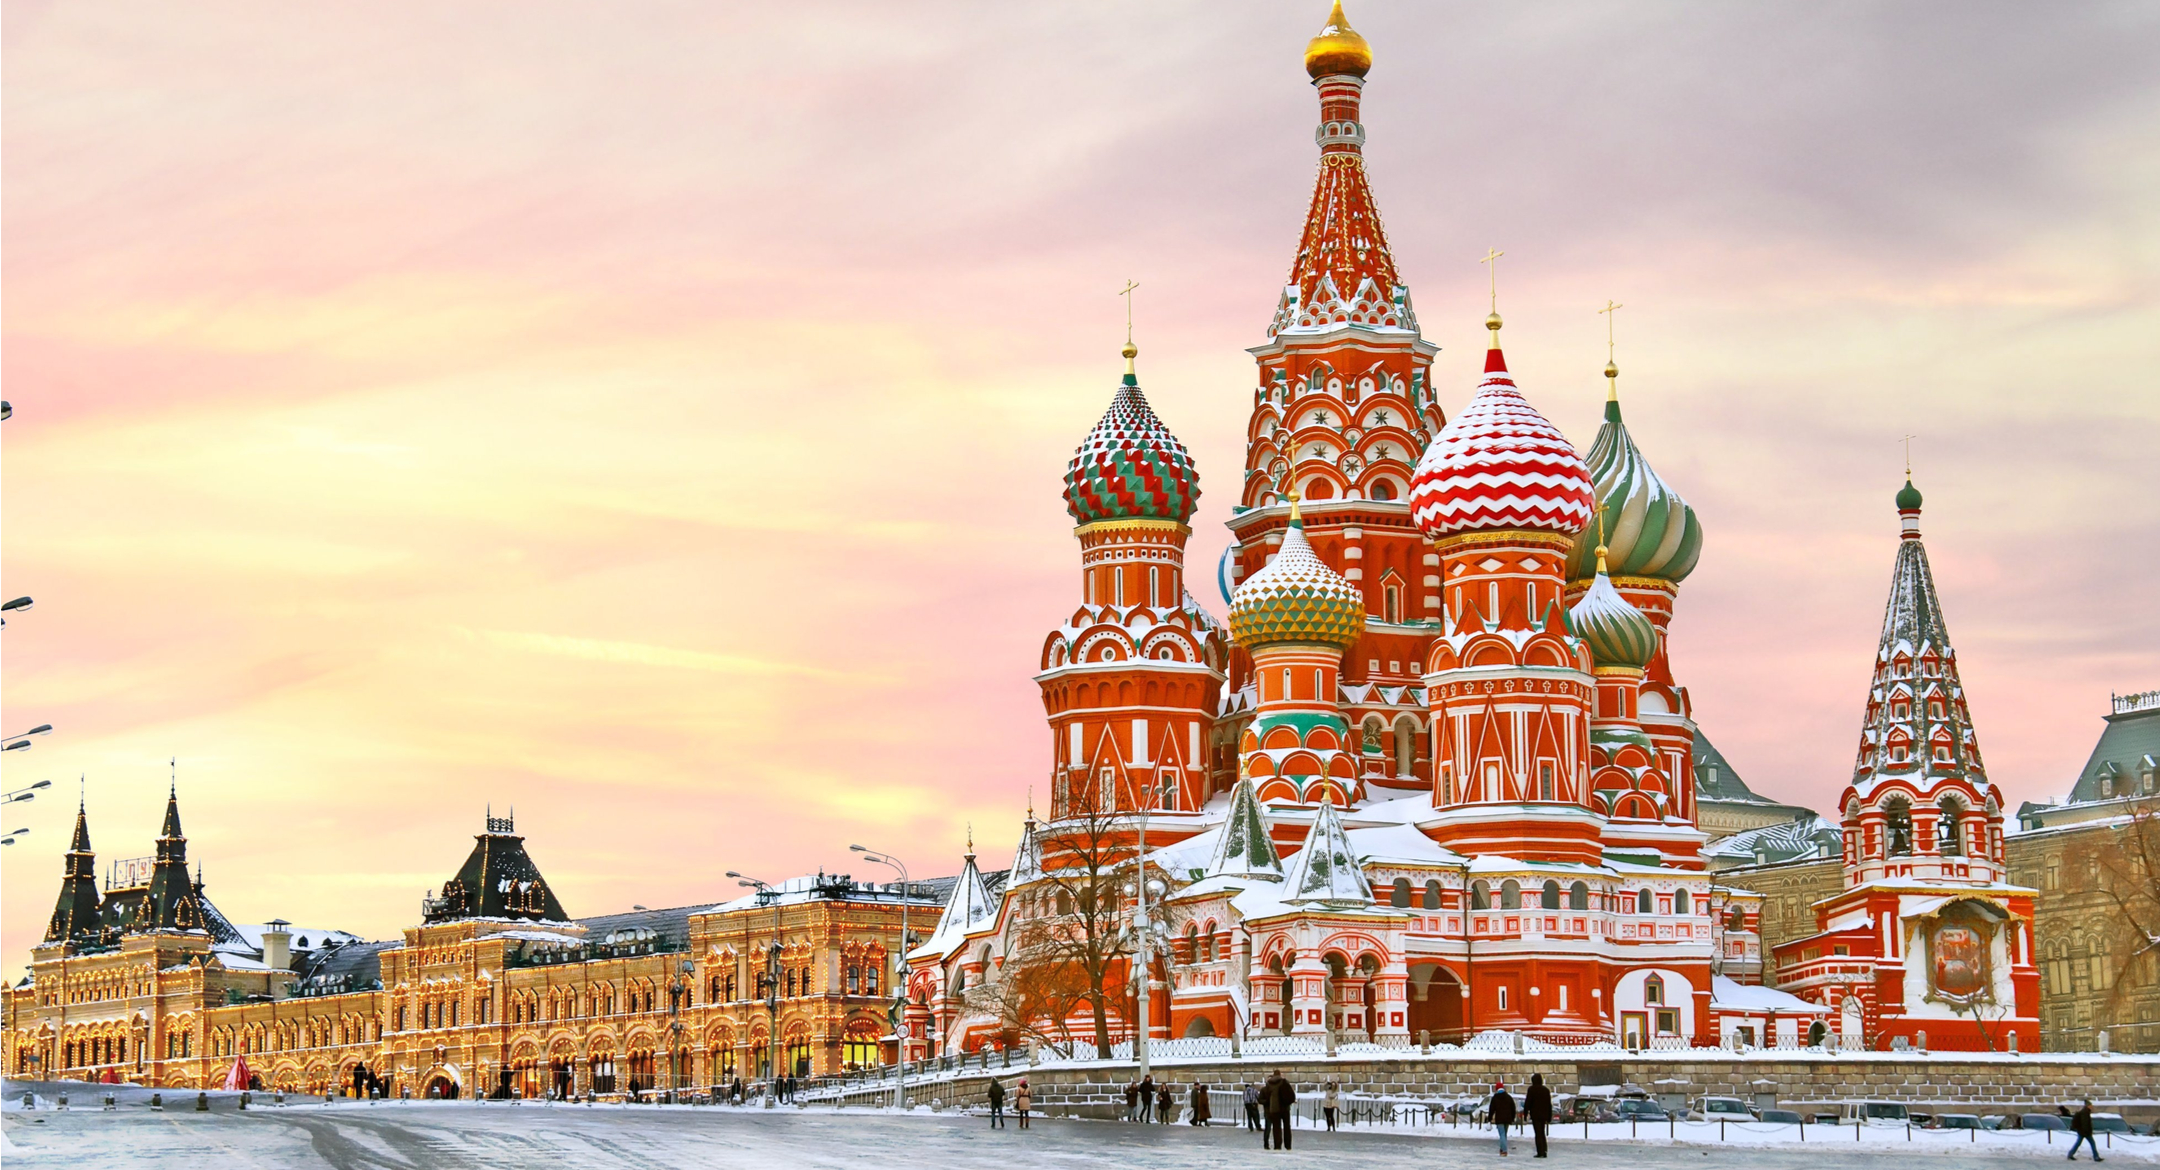  Saint Basil's cathedral in Moscow. Credit: Reidl/Shutterstock.com